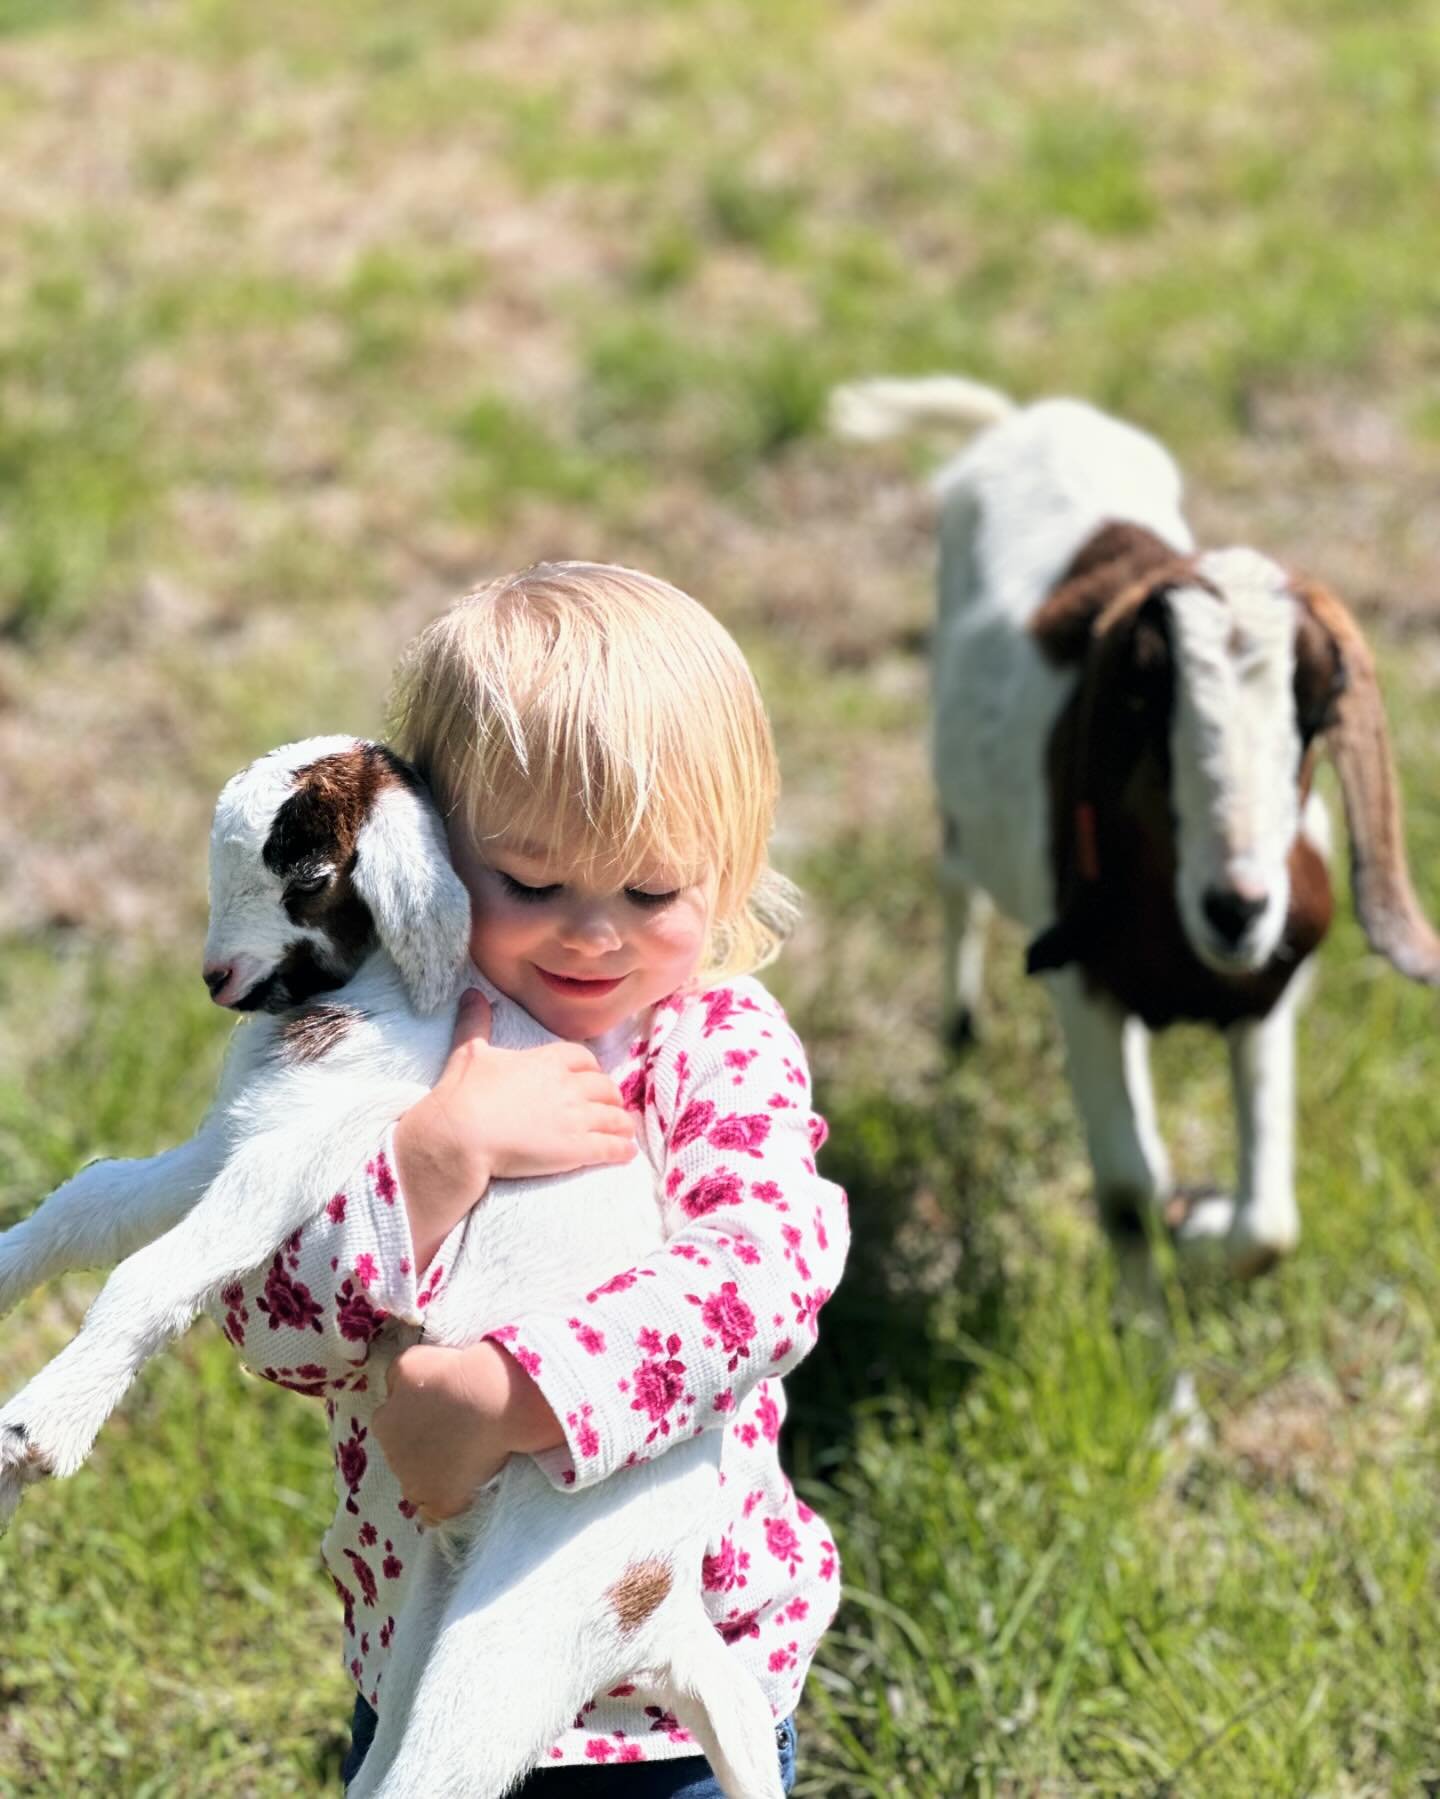 Spring continues to bring new life to the ranch. A sweet doeling joined the family from our Nubian Reba and Nigerian Dwarf Billy Ray. Welcome Patsy!  #mininubiangoatsofinstagram #mininubiandairygoats #nigeriandwarfgoats #nubian #goatsofinstagram #far